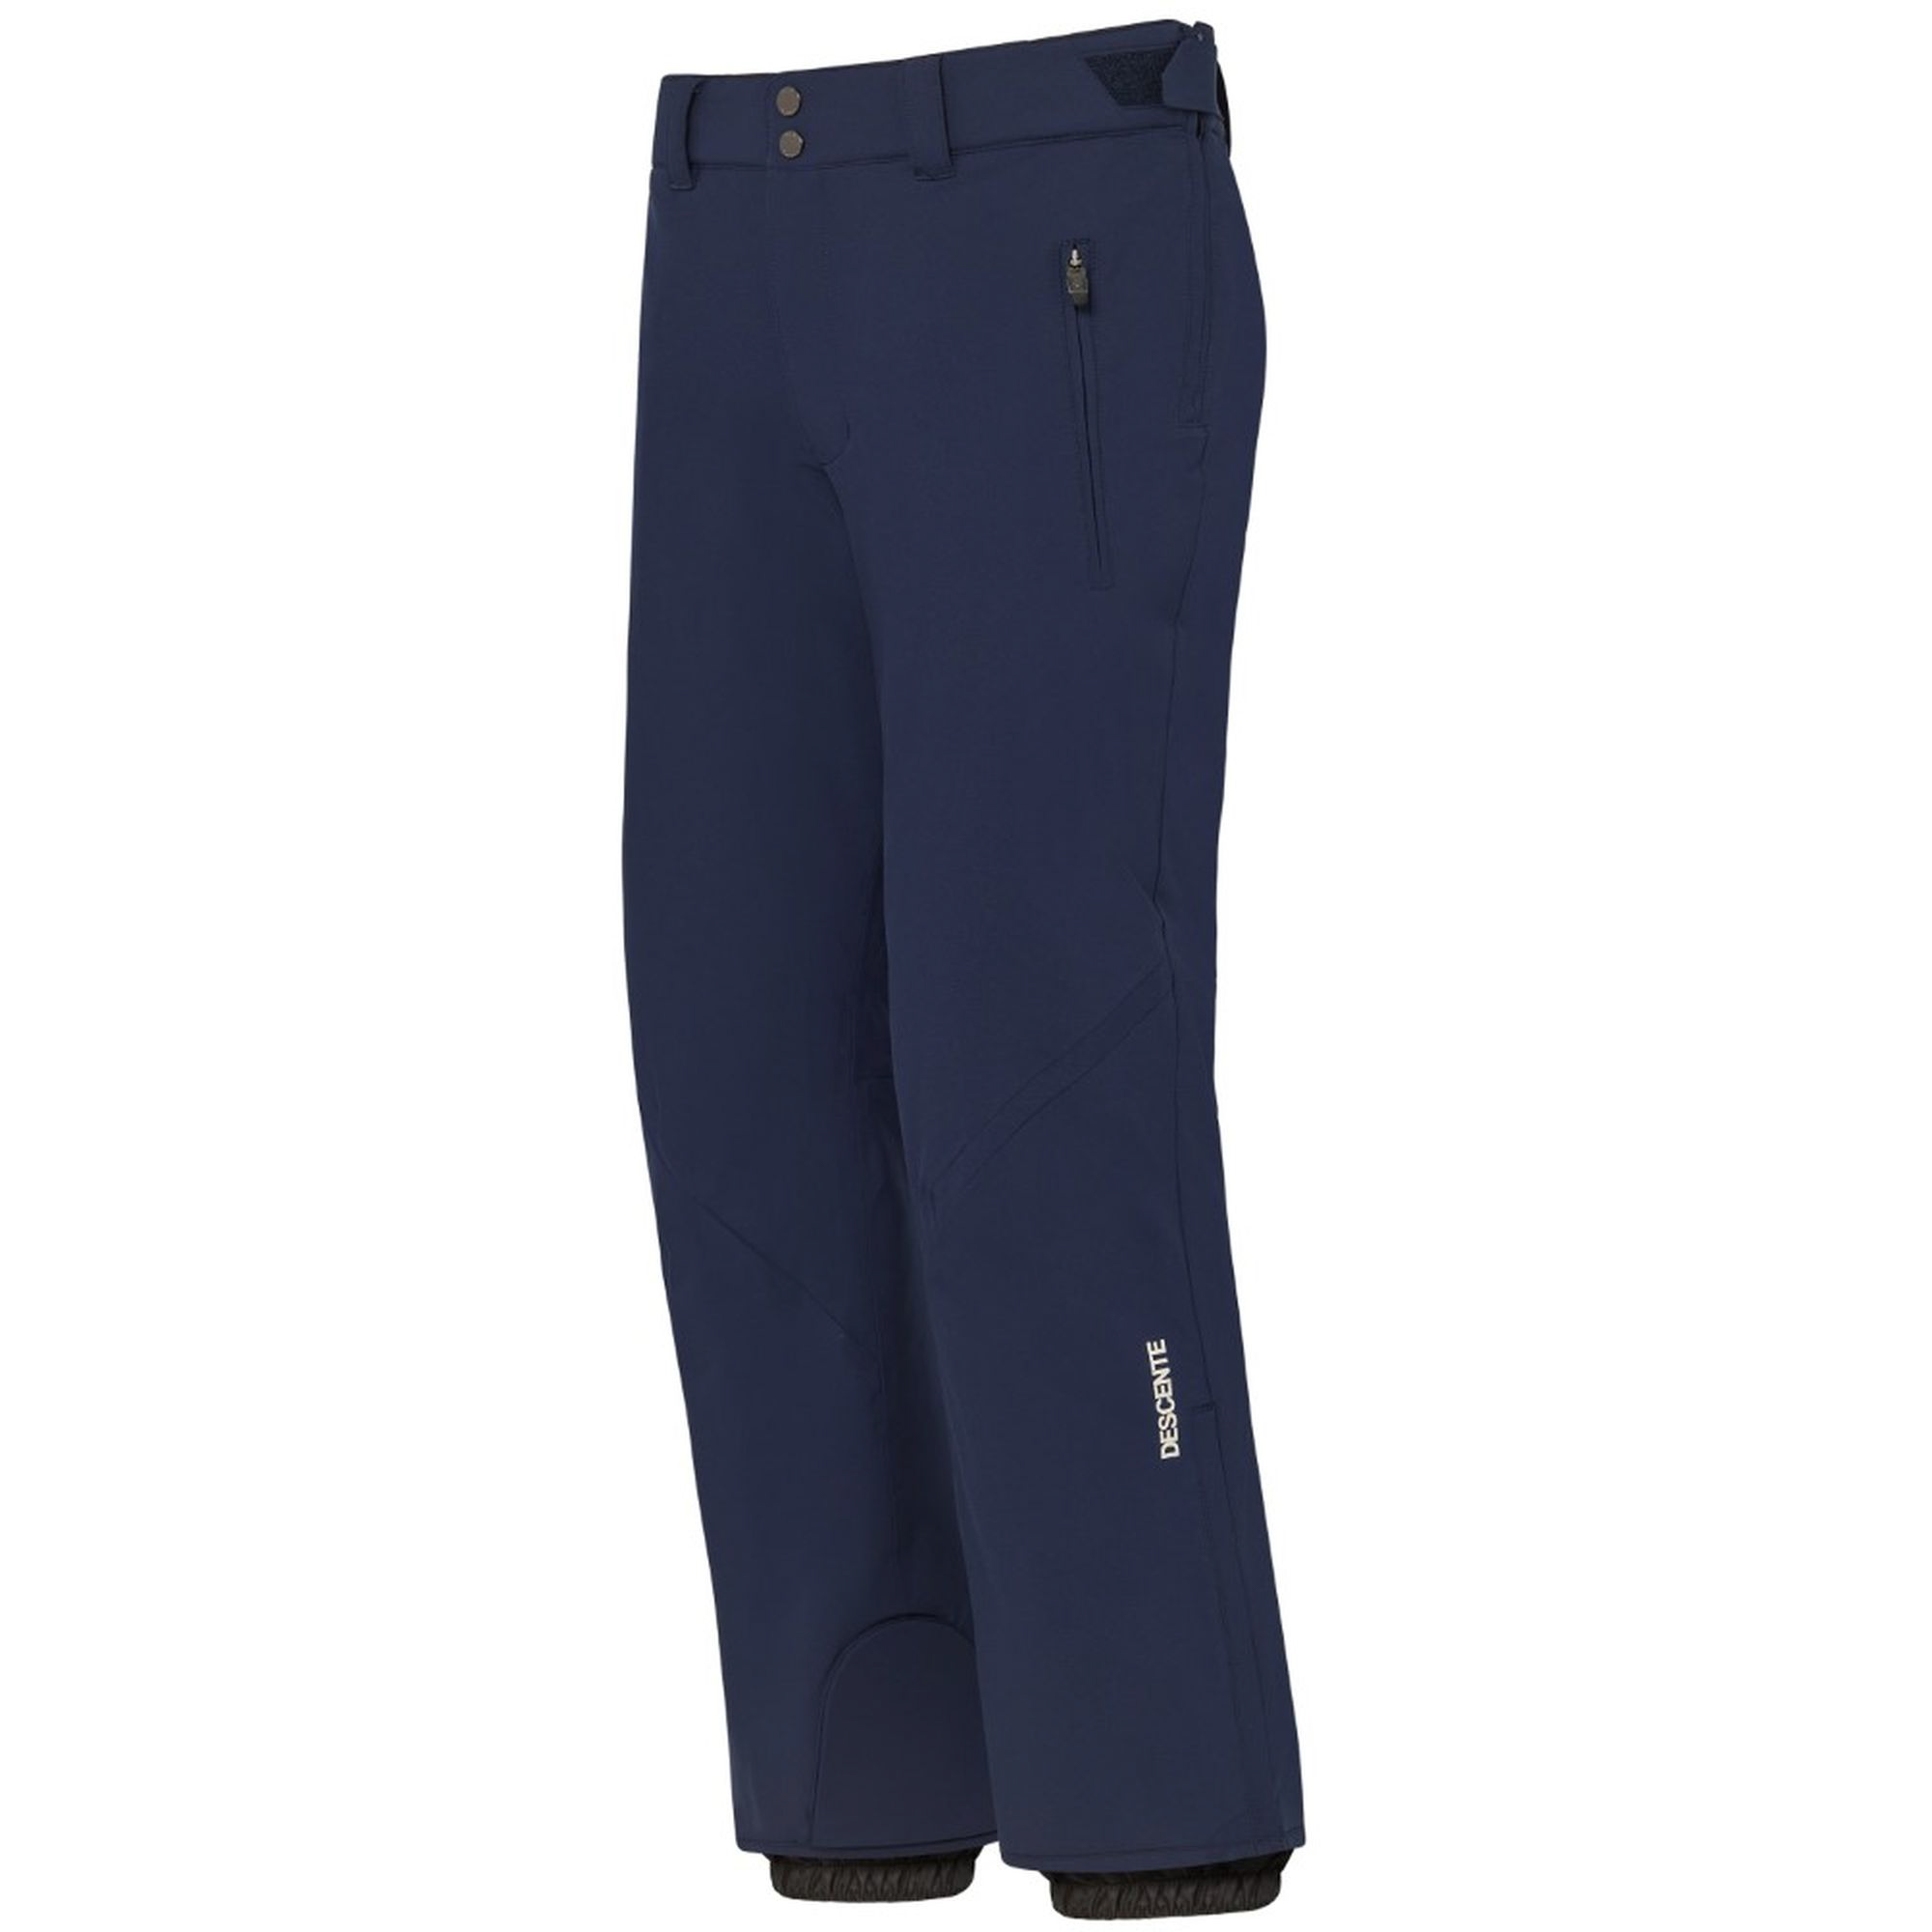 ROSCOE/INSULATED PANTS